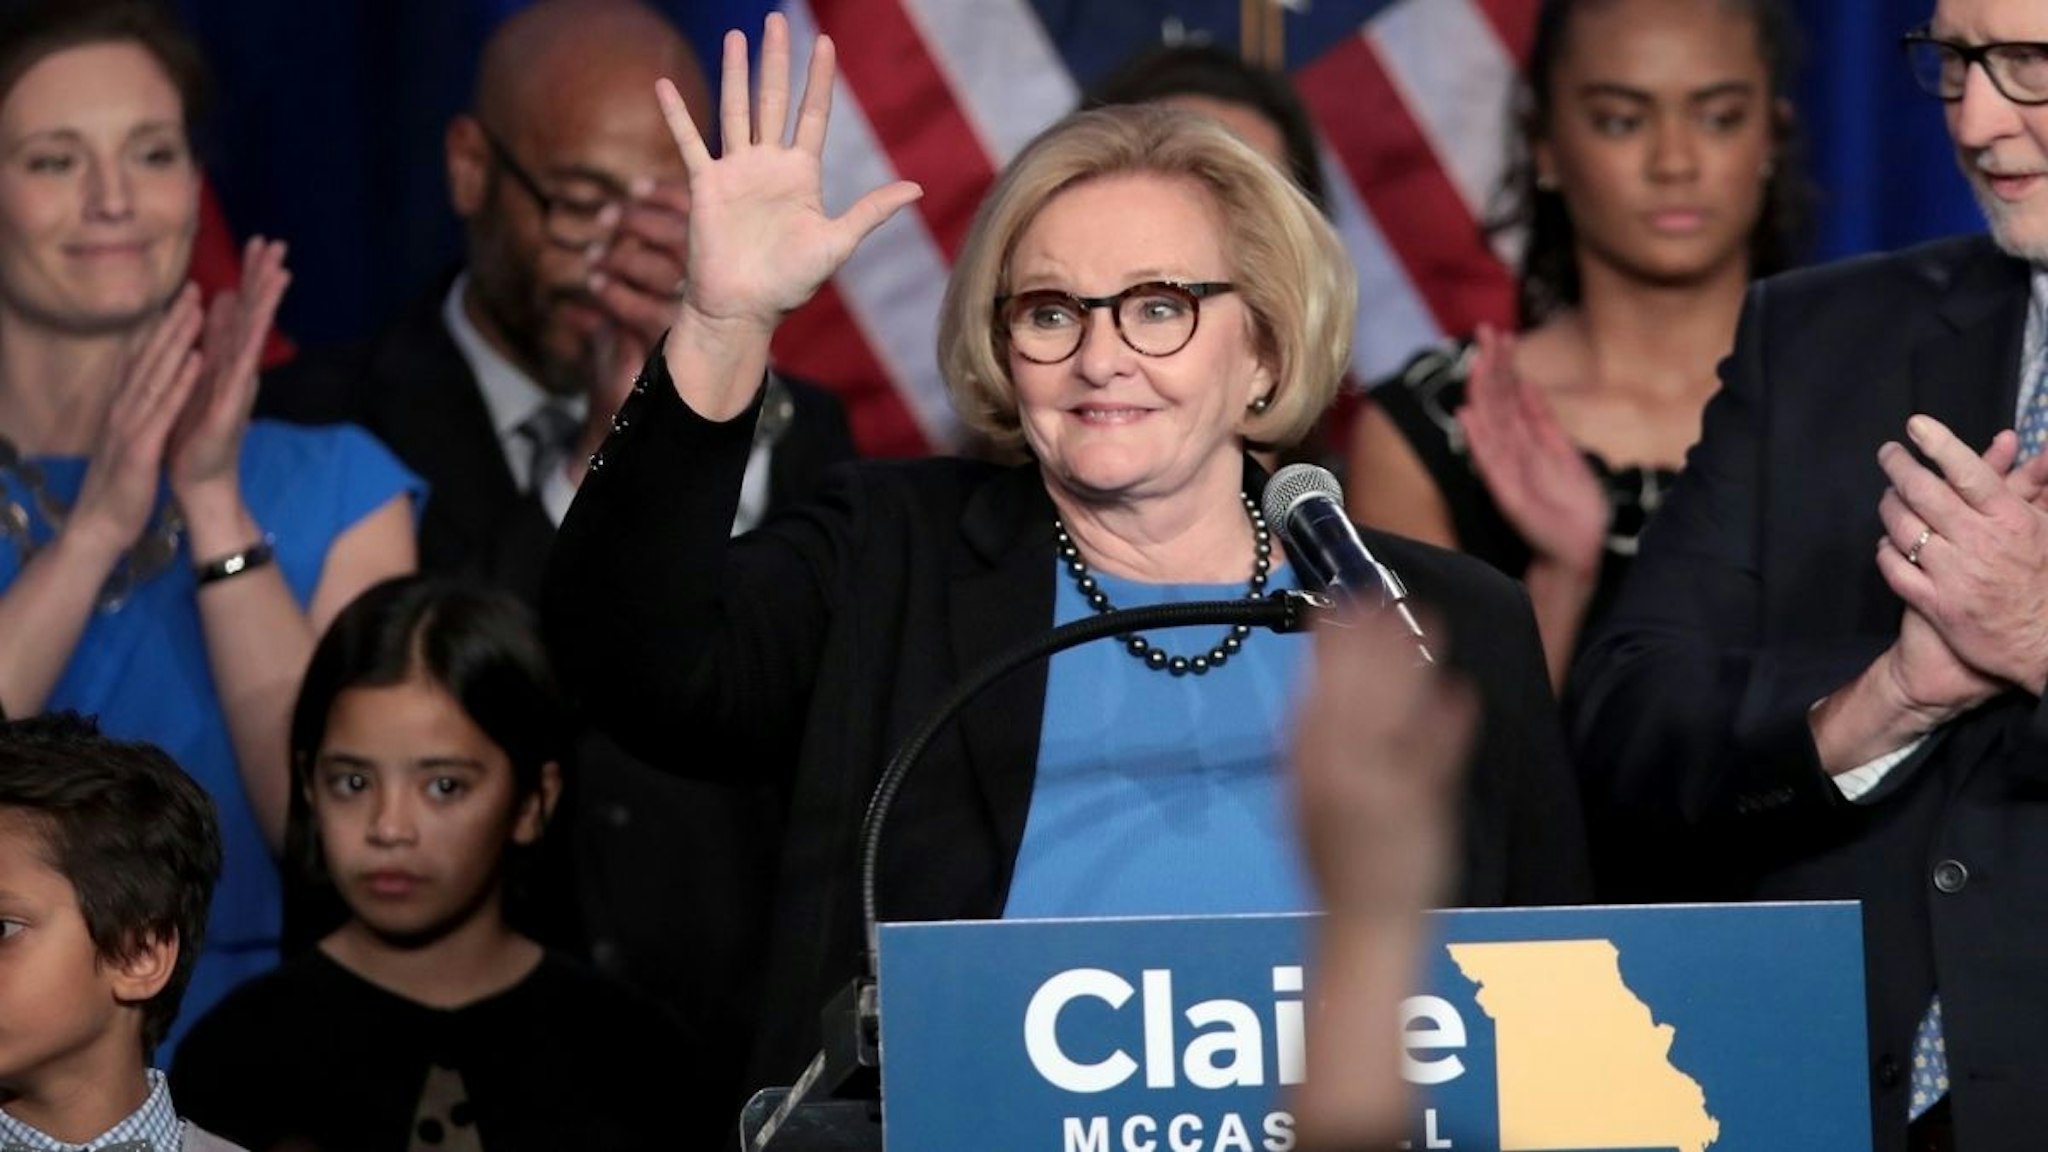 Senator Claire McCaskill (D-MO) concedes defeat in her bid to keep her U.S. Senate seat during an election-night rally on November 6, 2018 in St. Louis, Missouri.